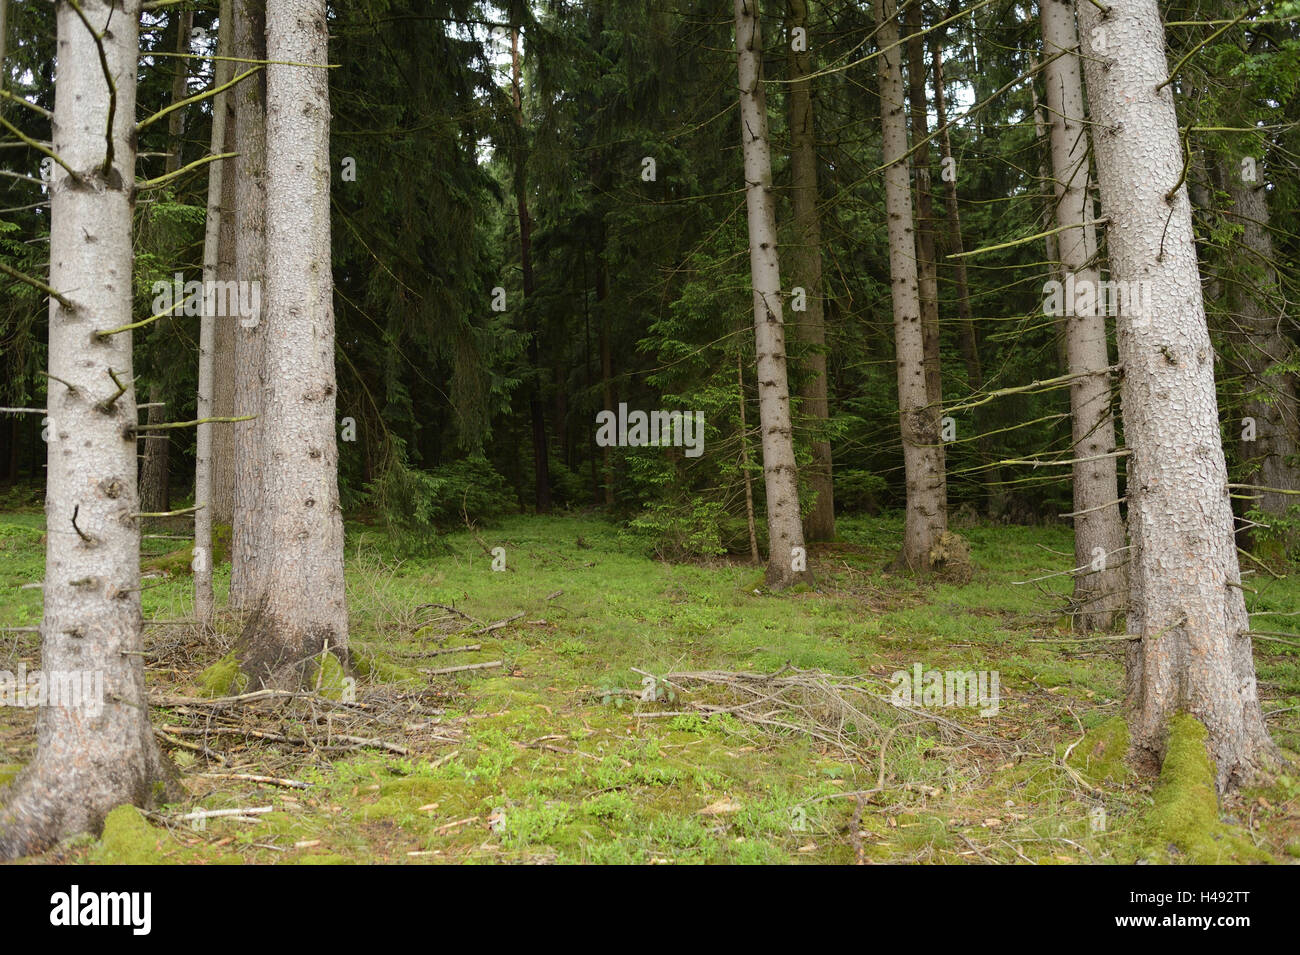 Wood, scenery, spruces, Picea abies, Stock Photo